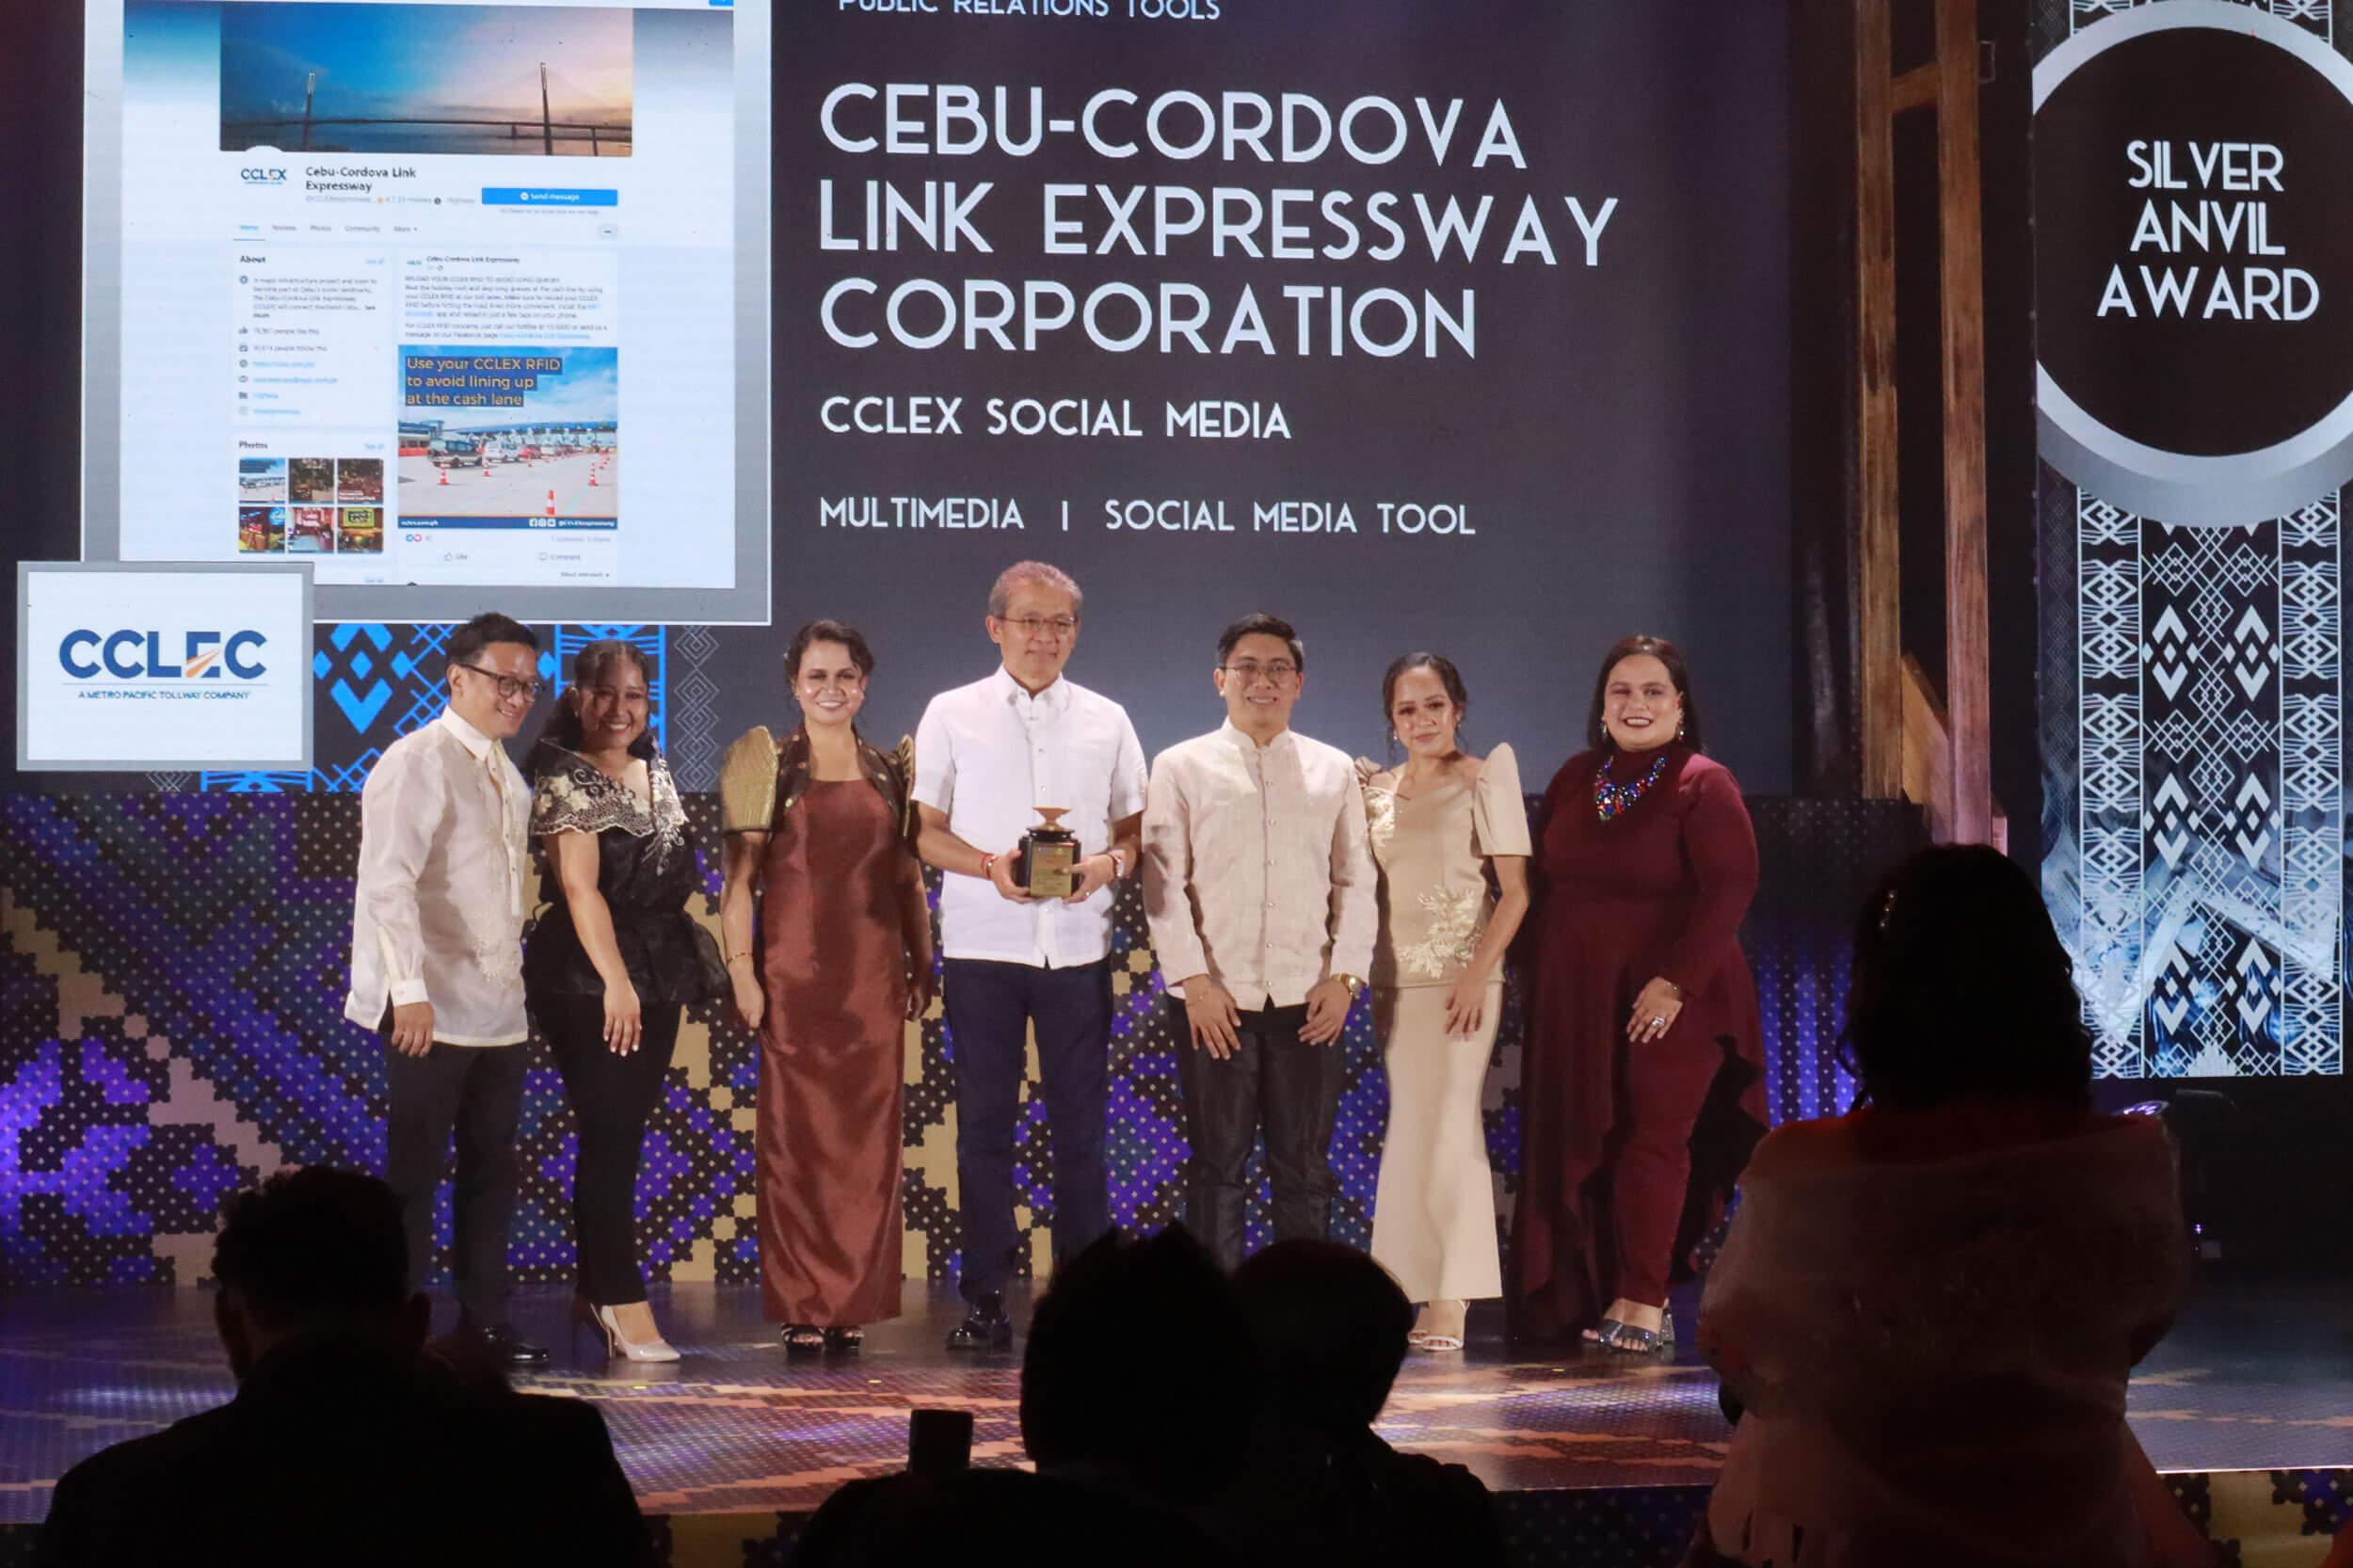 SILVER ANVIL. The CCLEC team receives a Silver Anvil for its use of social media to highlight the benefits of the Cebu-Cordova Link Expressway. Accepting the awards for CCLEC are President and General Manager Allan G. Alfon (center) and the CCLEC Communications and Stakeholders Management (CSM) team – Jasmin G. Suma-oy, Princess Dawn H. Felicitas, Imare Sheen B. Gutang, Kendall A. Roa, and Carryl D. Alpuerto.